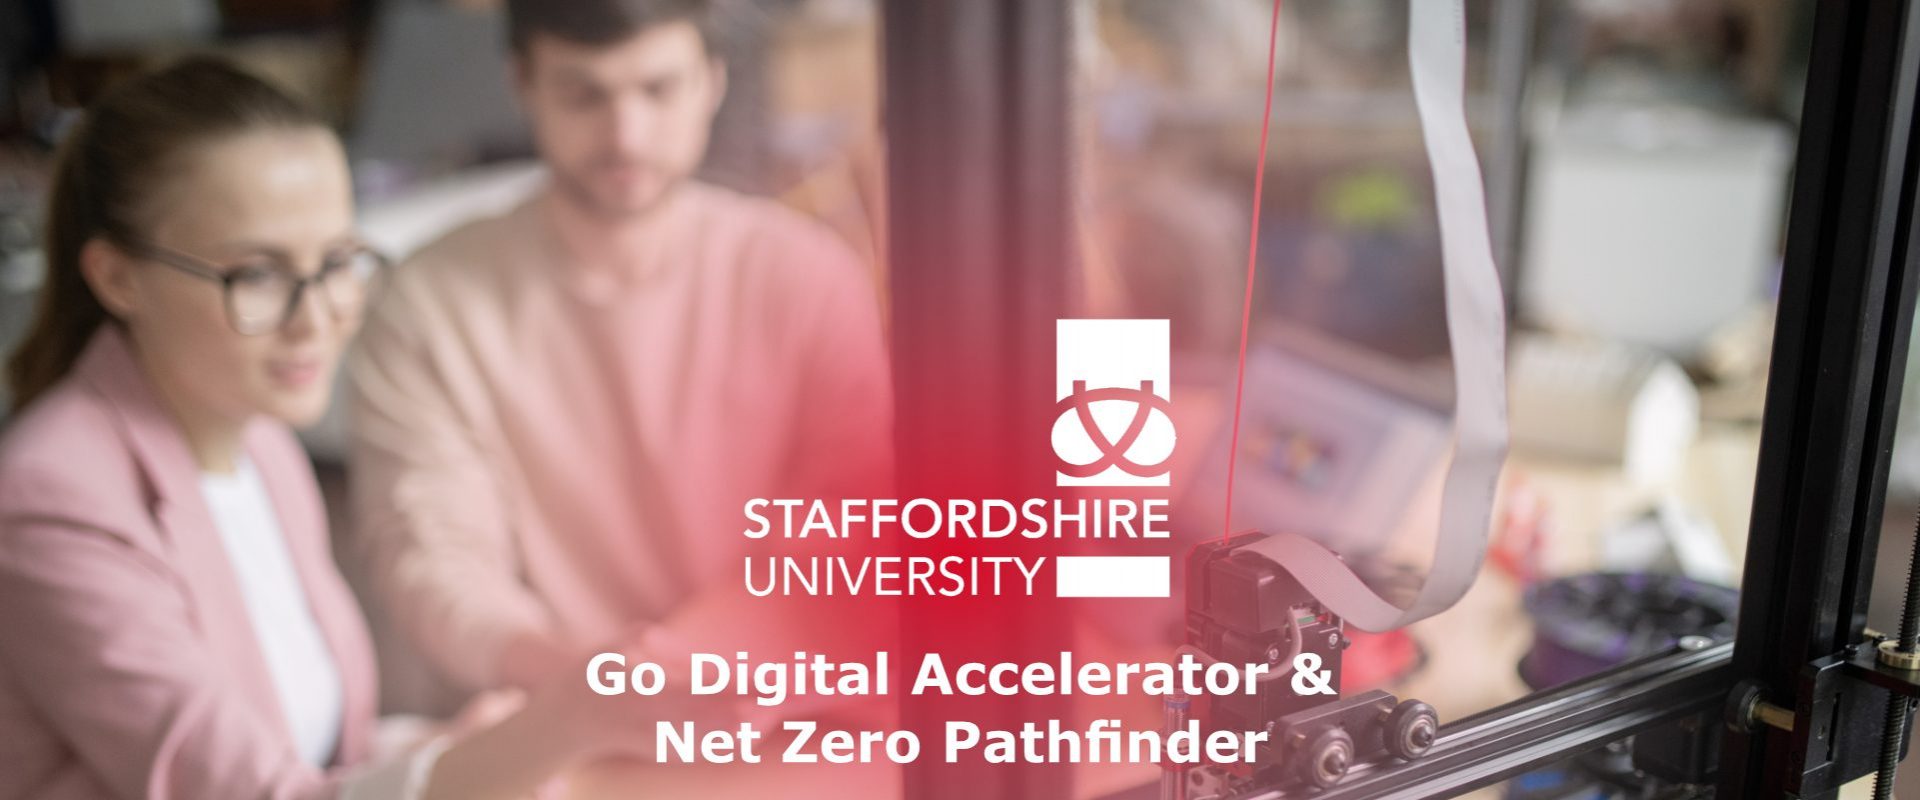 Cannock Chase businesses can apply for Staffordshire University programmes